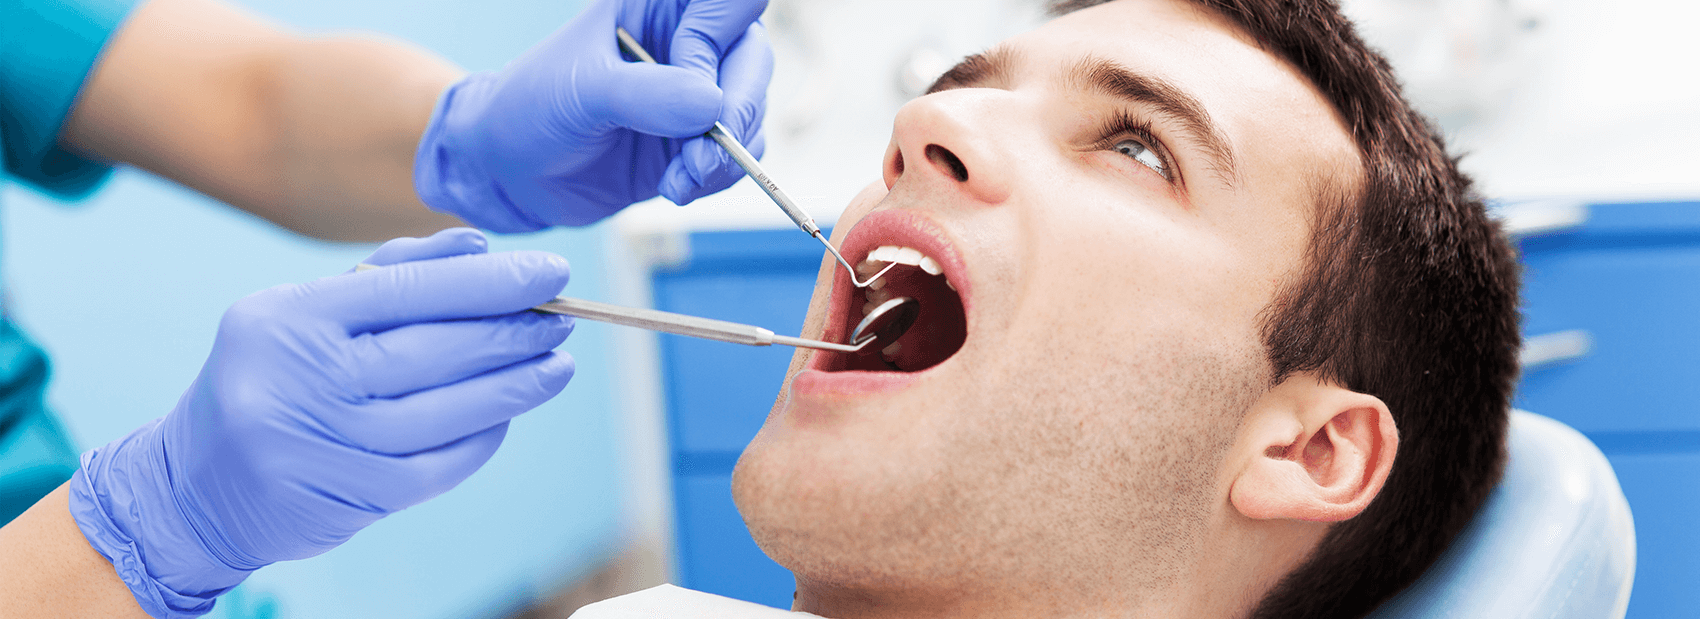 Man laying back and dental chair with his mouth open while the hygienist begins an exam